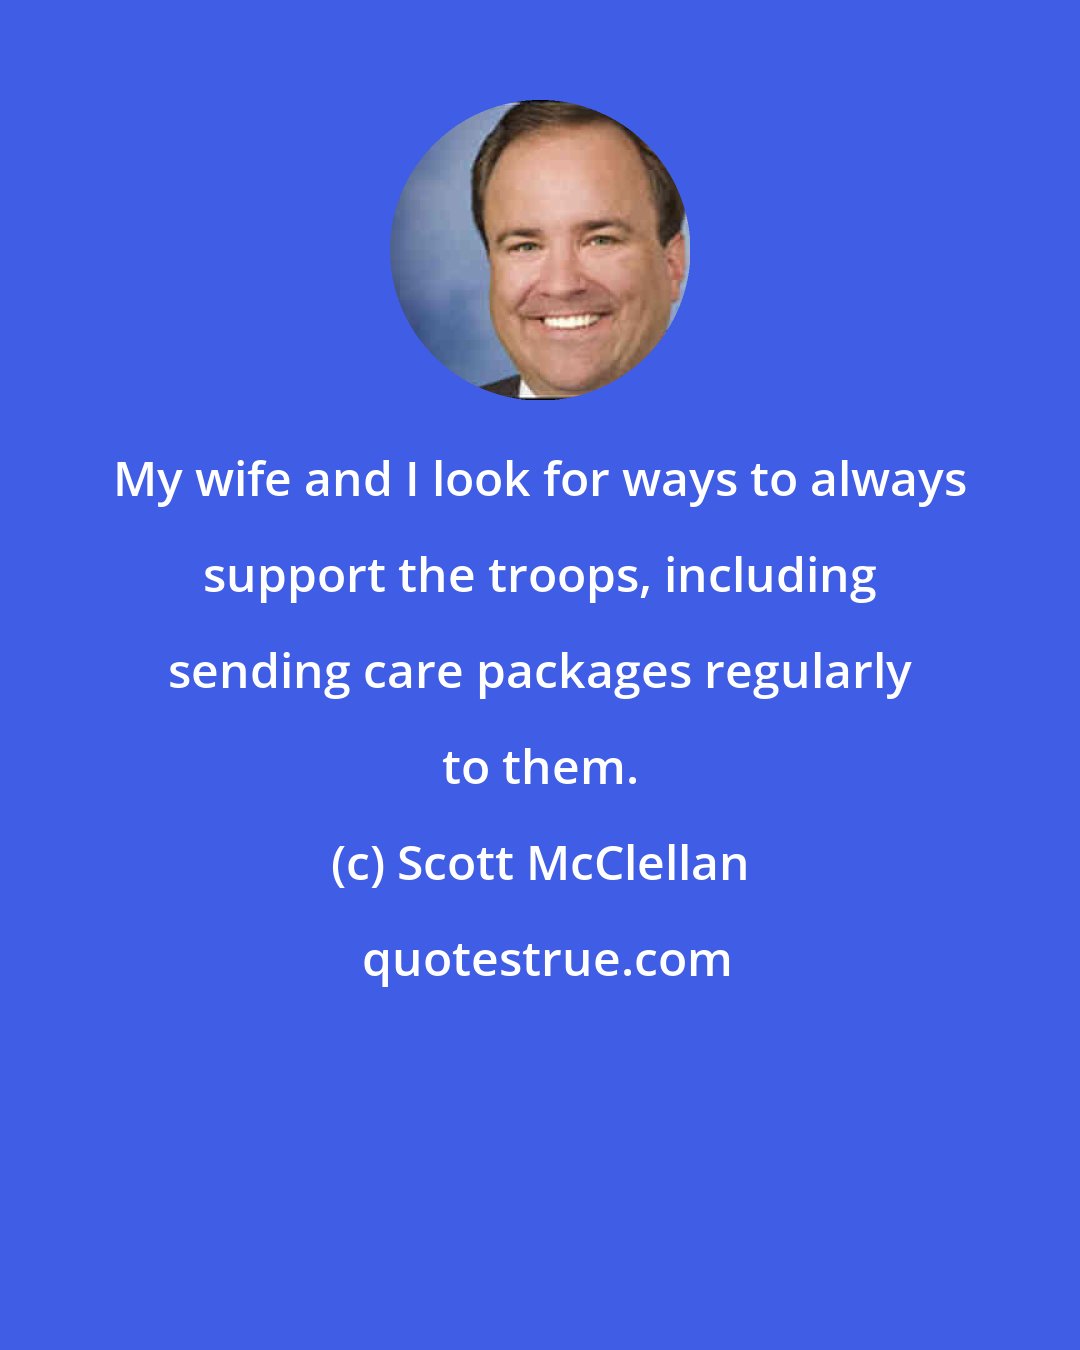 Scott McClellan: My wife and I look for ways to always support the troops, including sending care packages regularly to them.